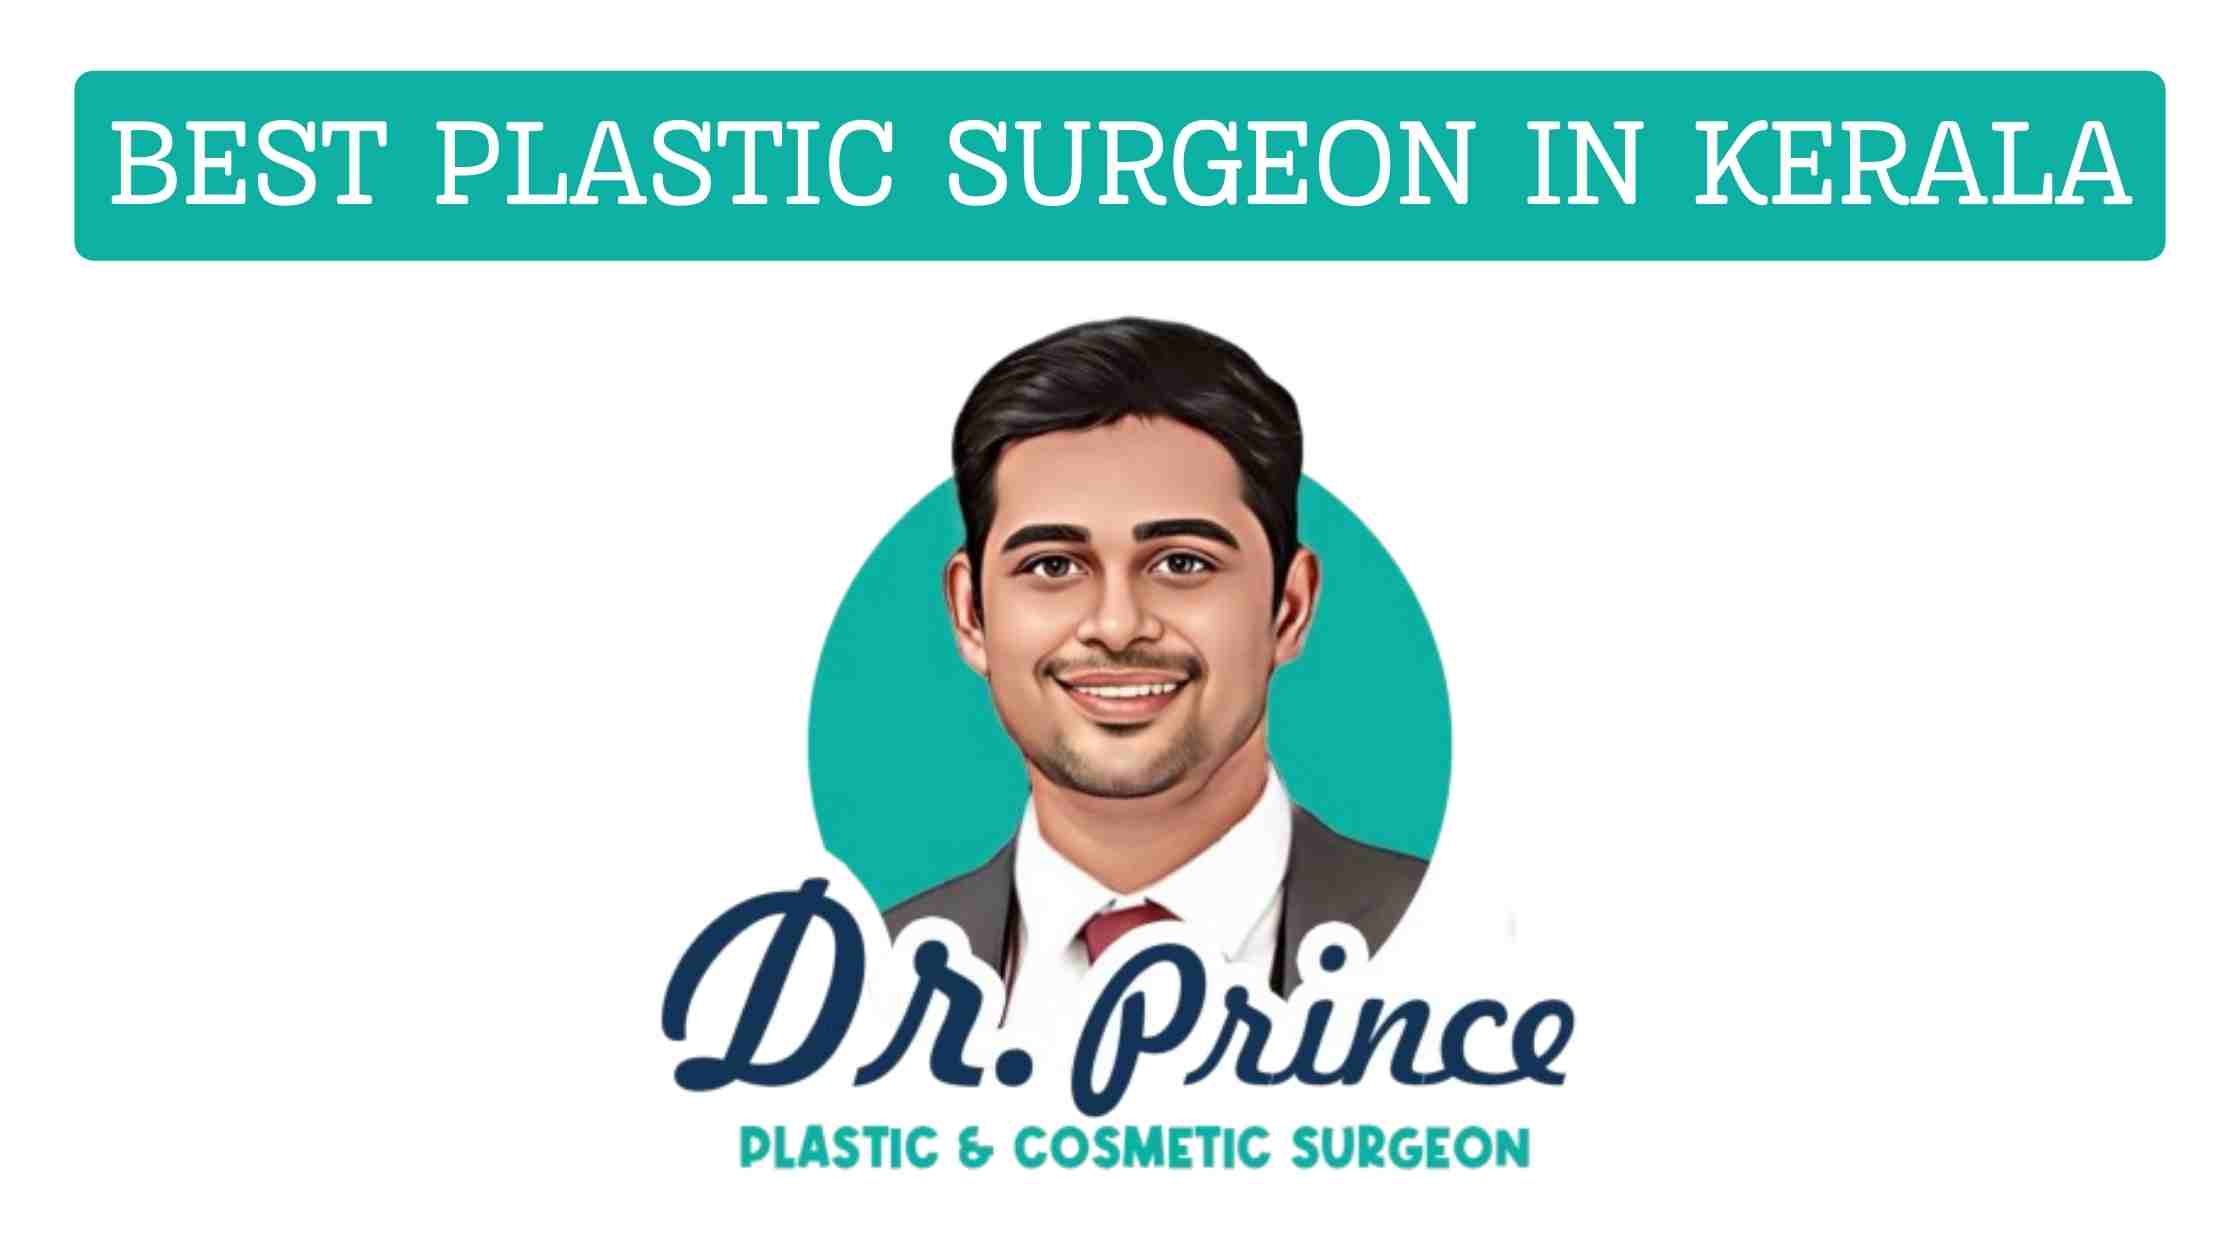 Dr. Prince, the Best Plastic Surgeon in Kerala, performing a procedure with expertise and care.